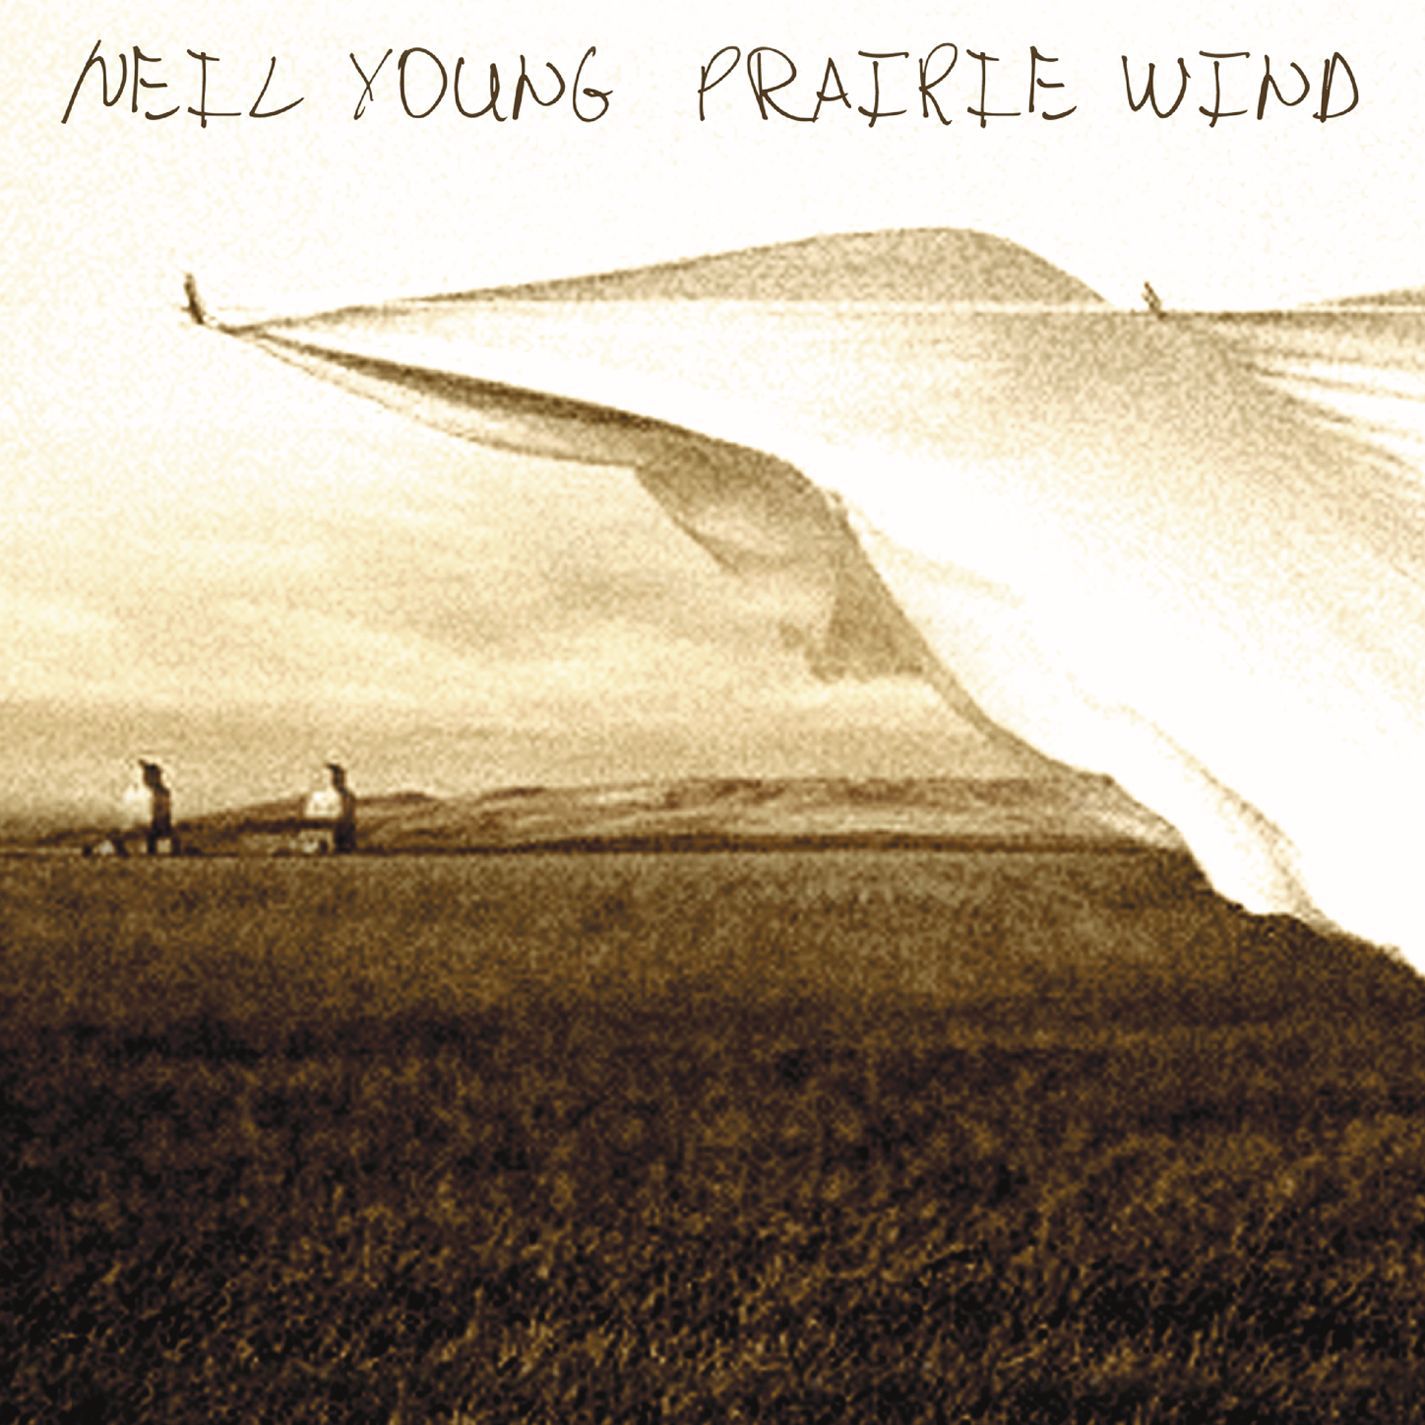 Neil Young - 2005 - Prairie Wind [2016] 24-96